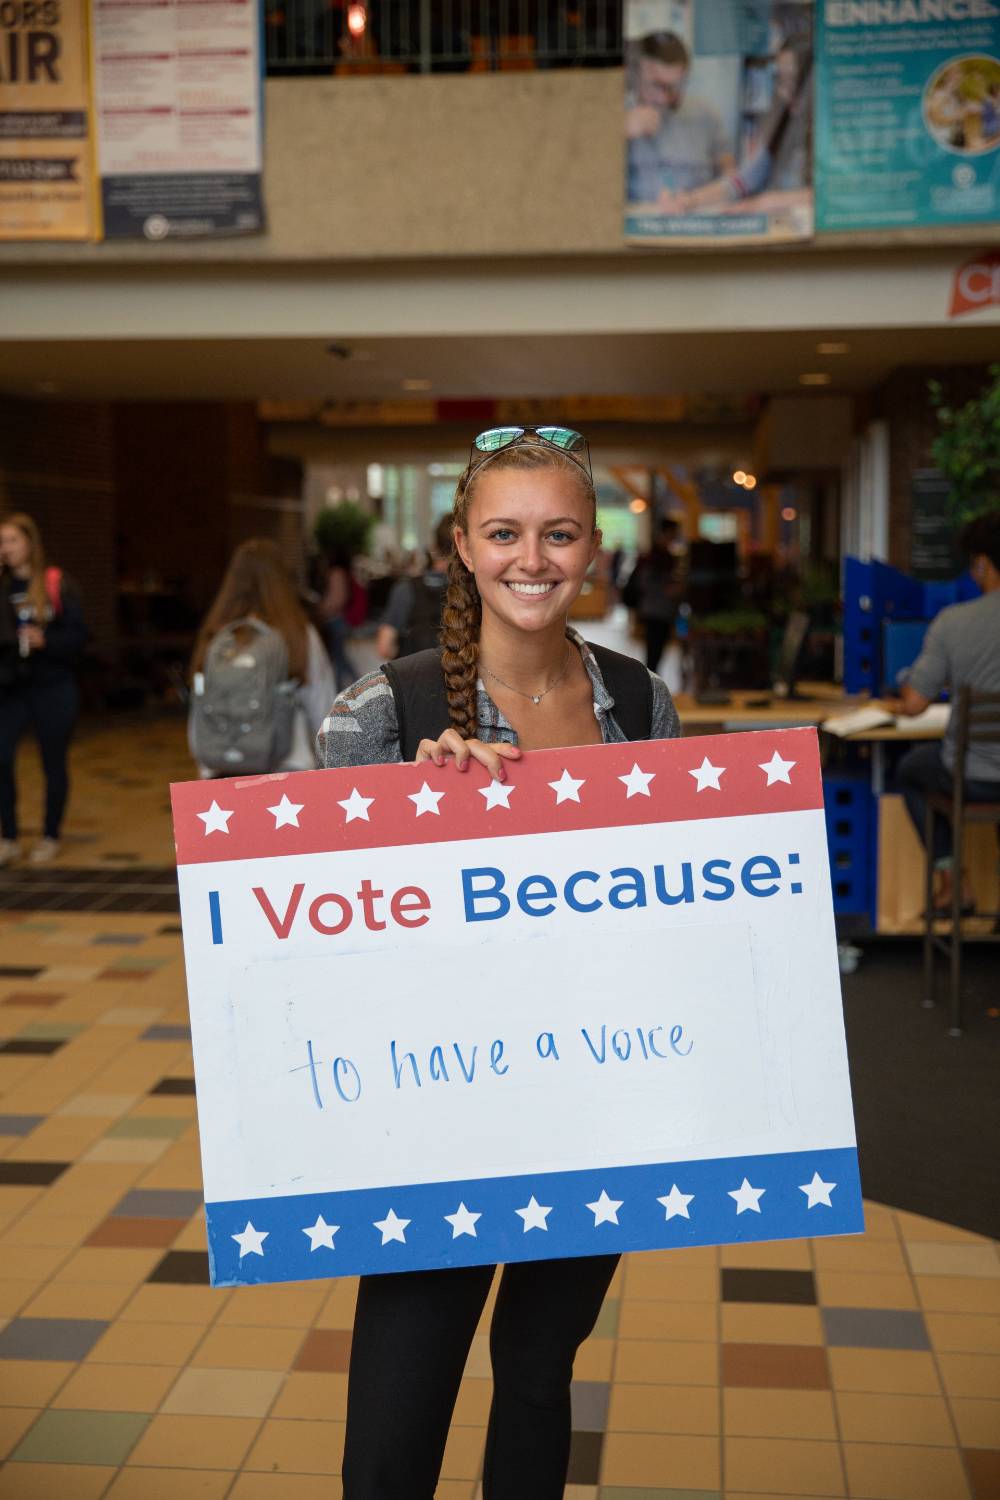 Student holding sign titled "I vote because: to have a voice"